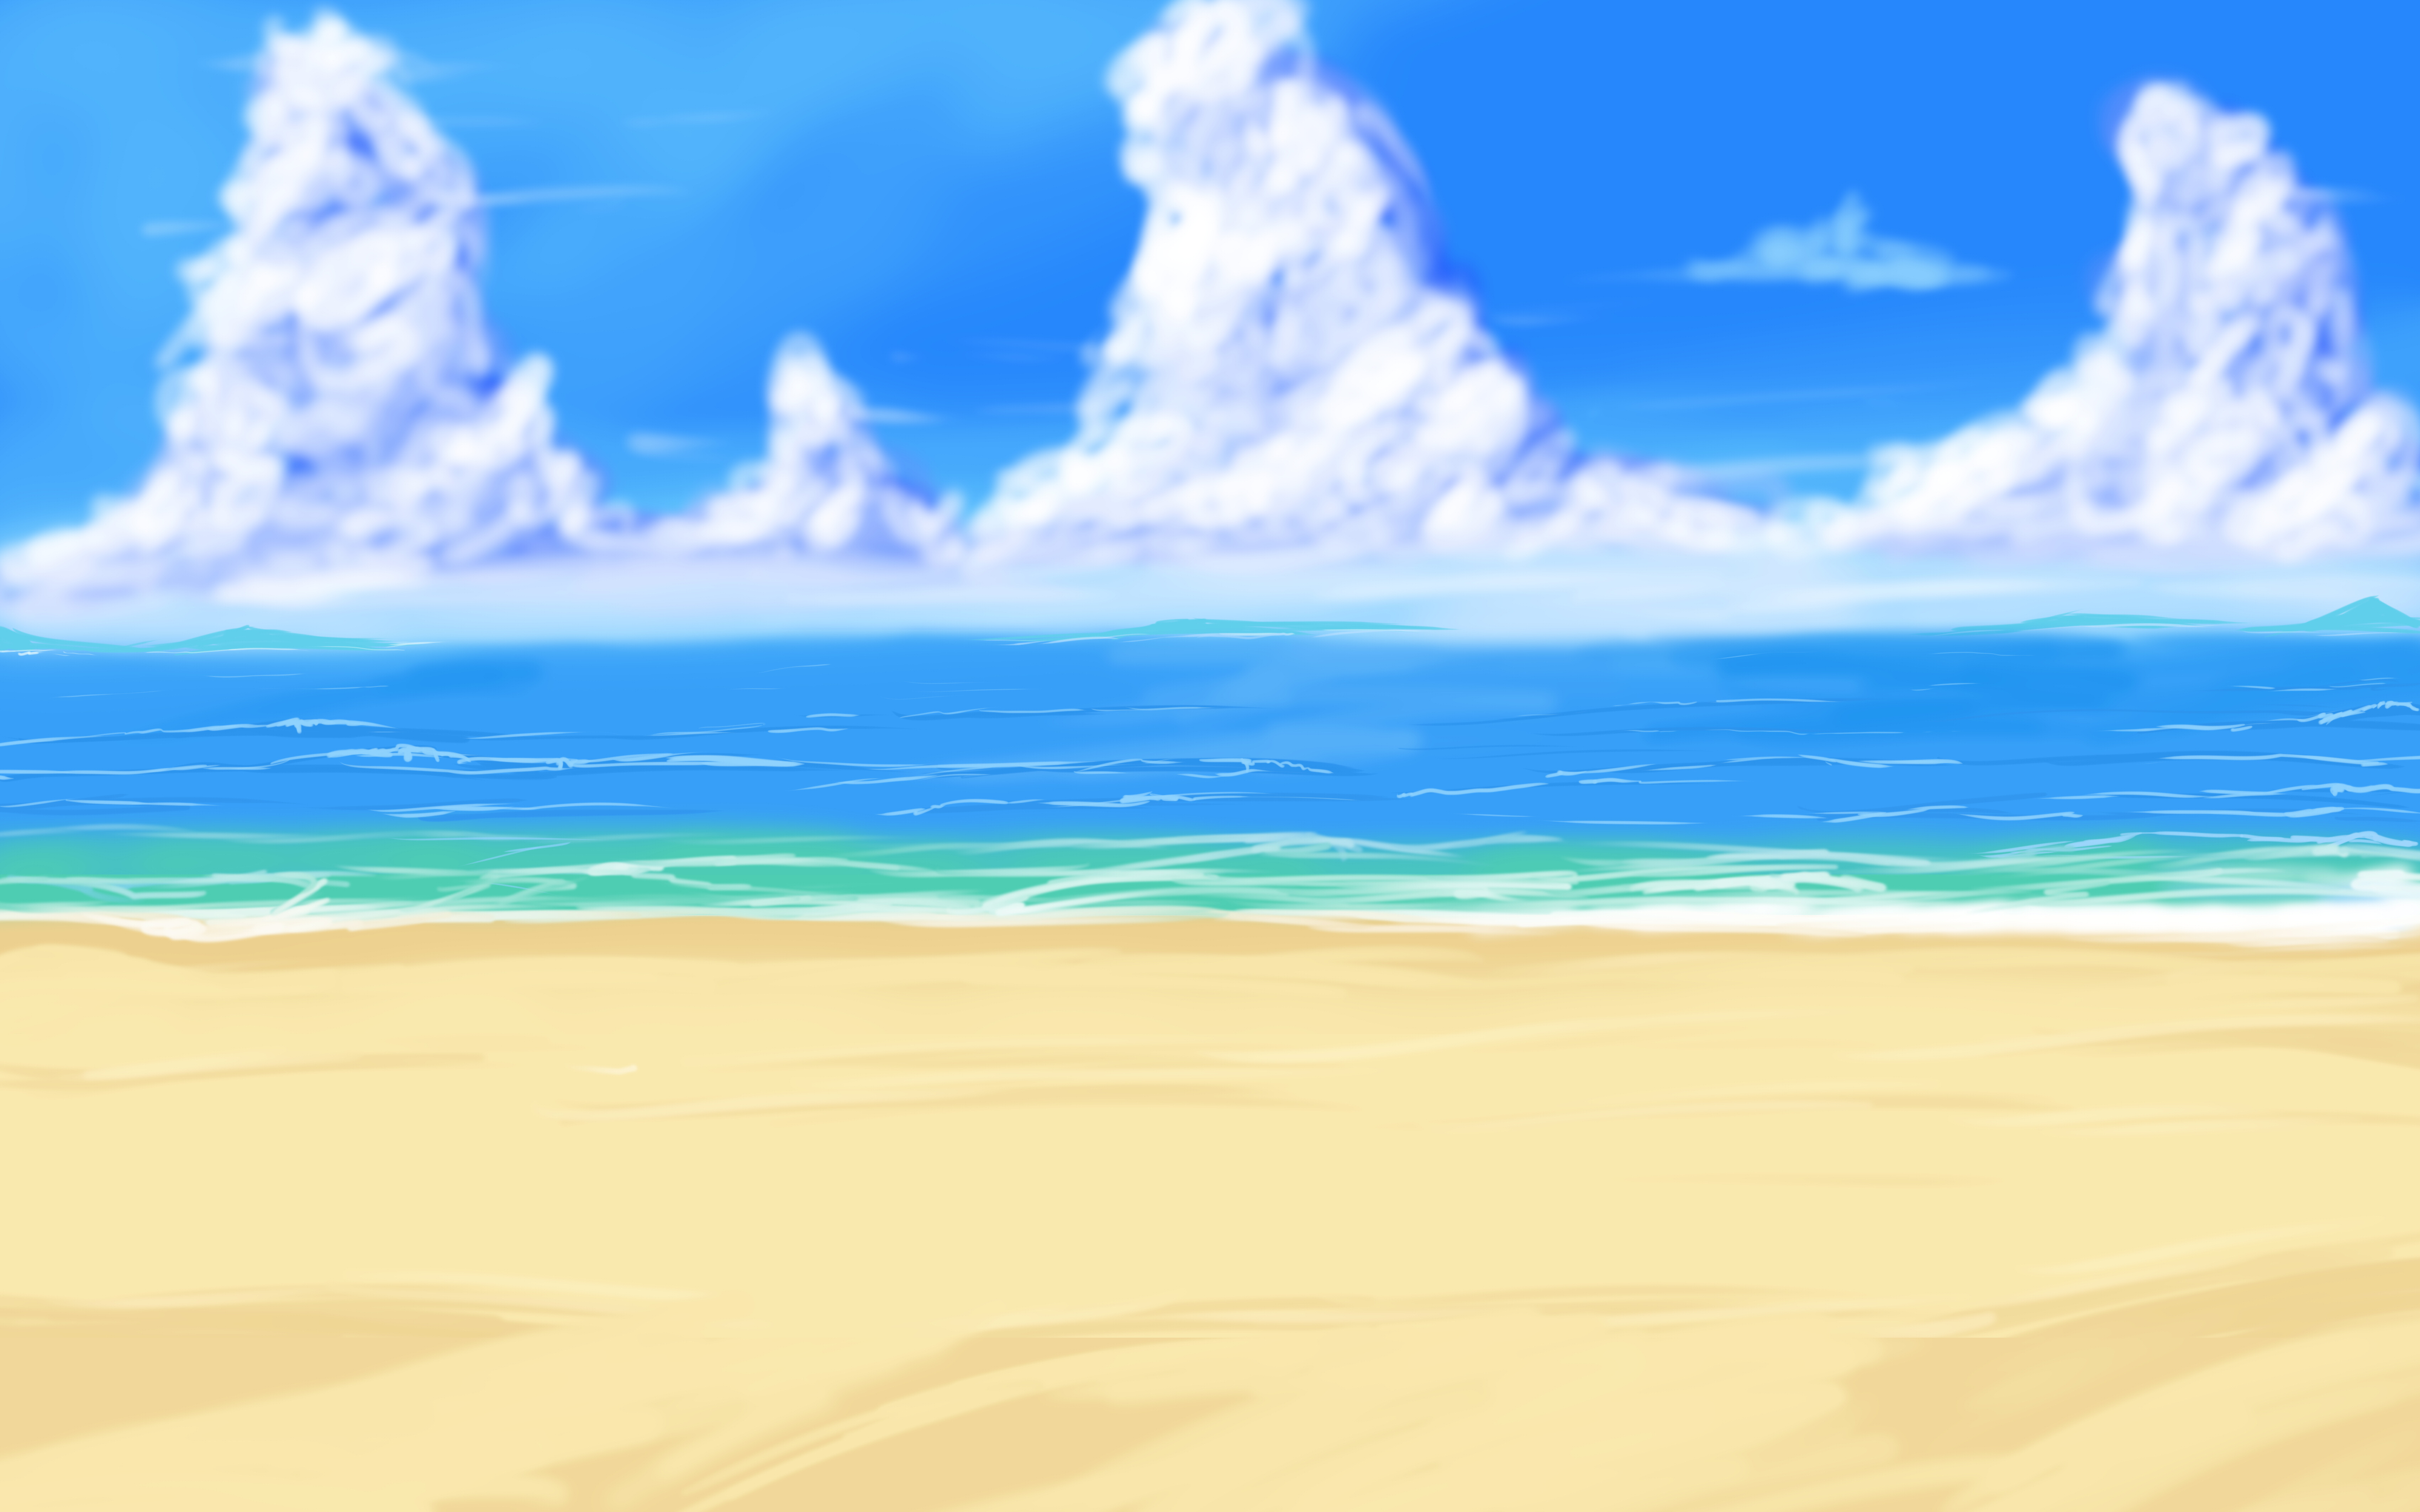 Big Anime Style Beach Background by wbd on